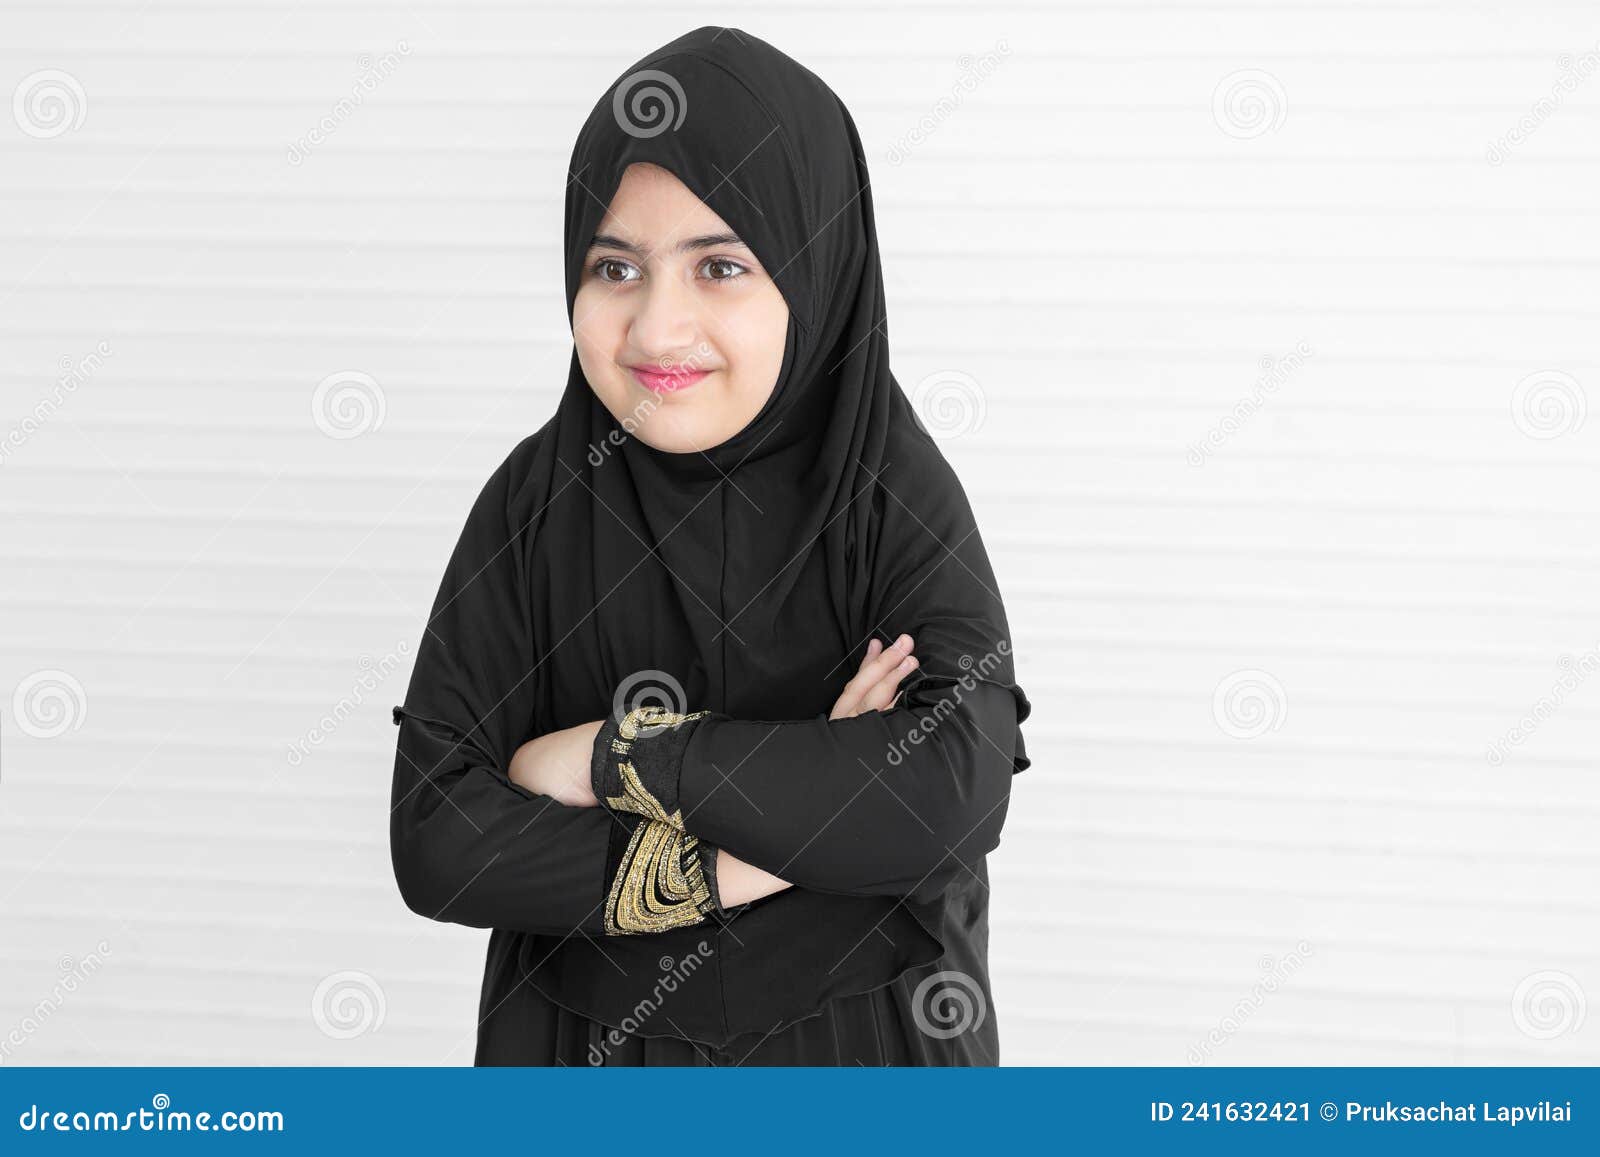 Pak Muslim Black Hijab Porntube - Little Asian Pakistani Muslim Girl Wearing Black Hijab with Beautiful Eyes  is Smiling and Standing with Arms Crossed Stock Image - Image of hand,  faith: 241632421